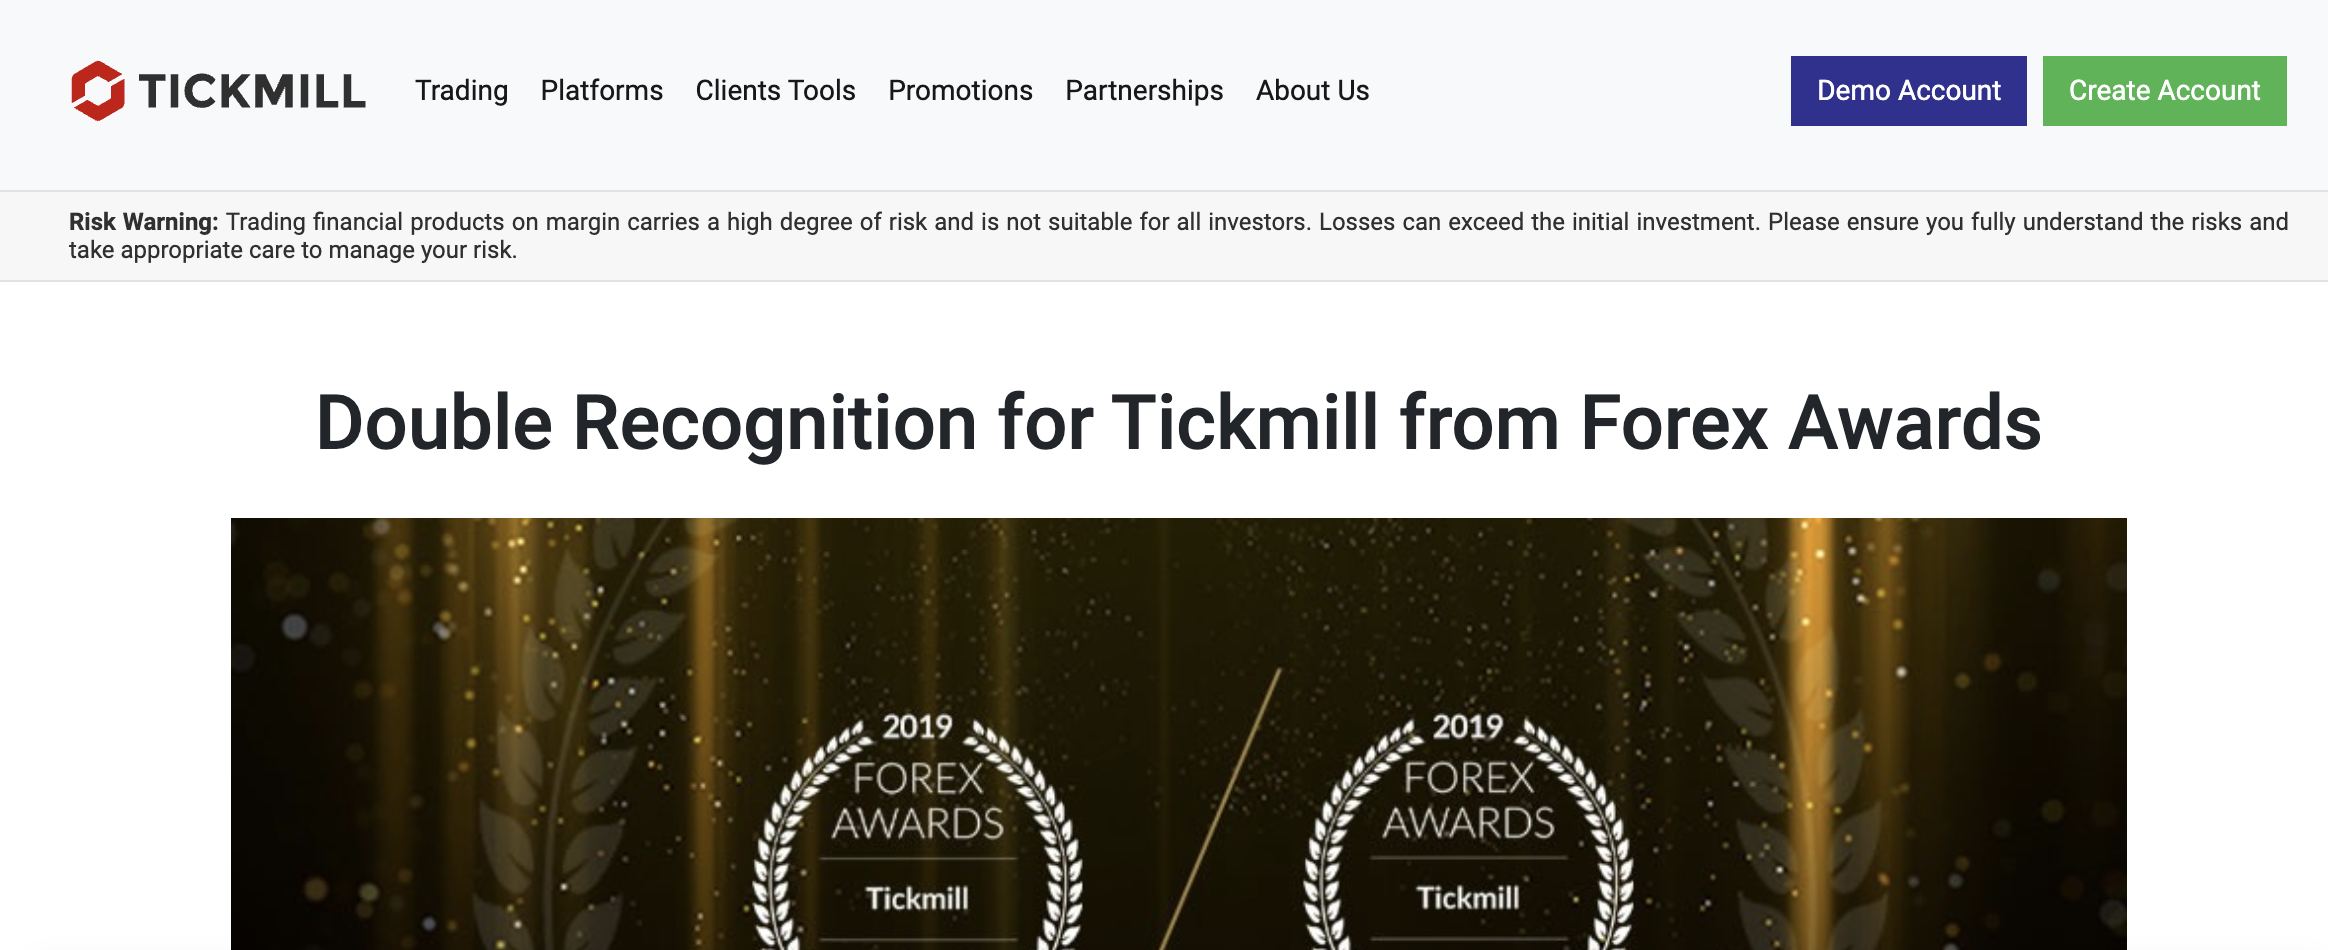 Tickmill Awards and Recognition